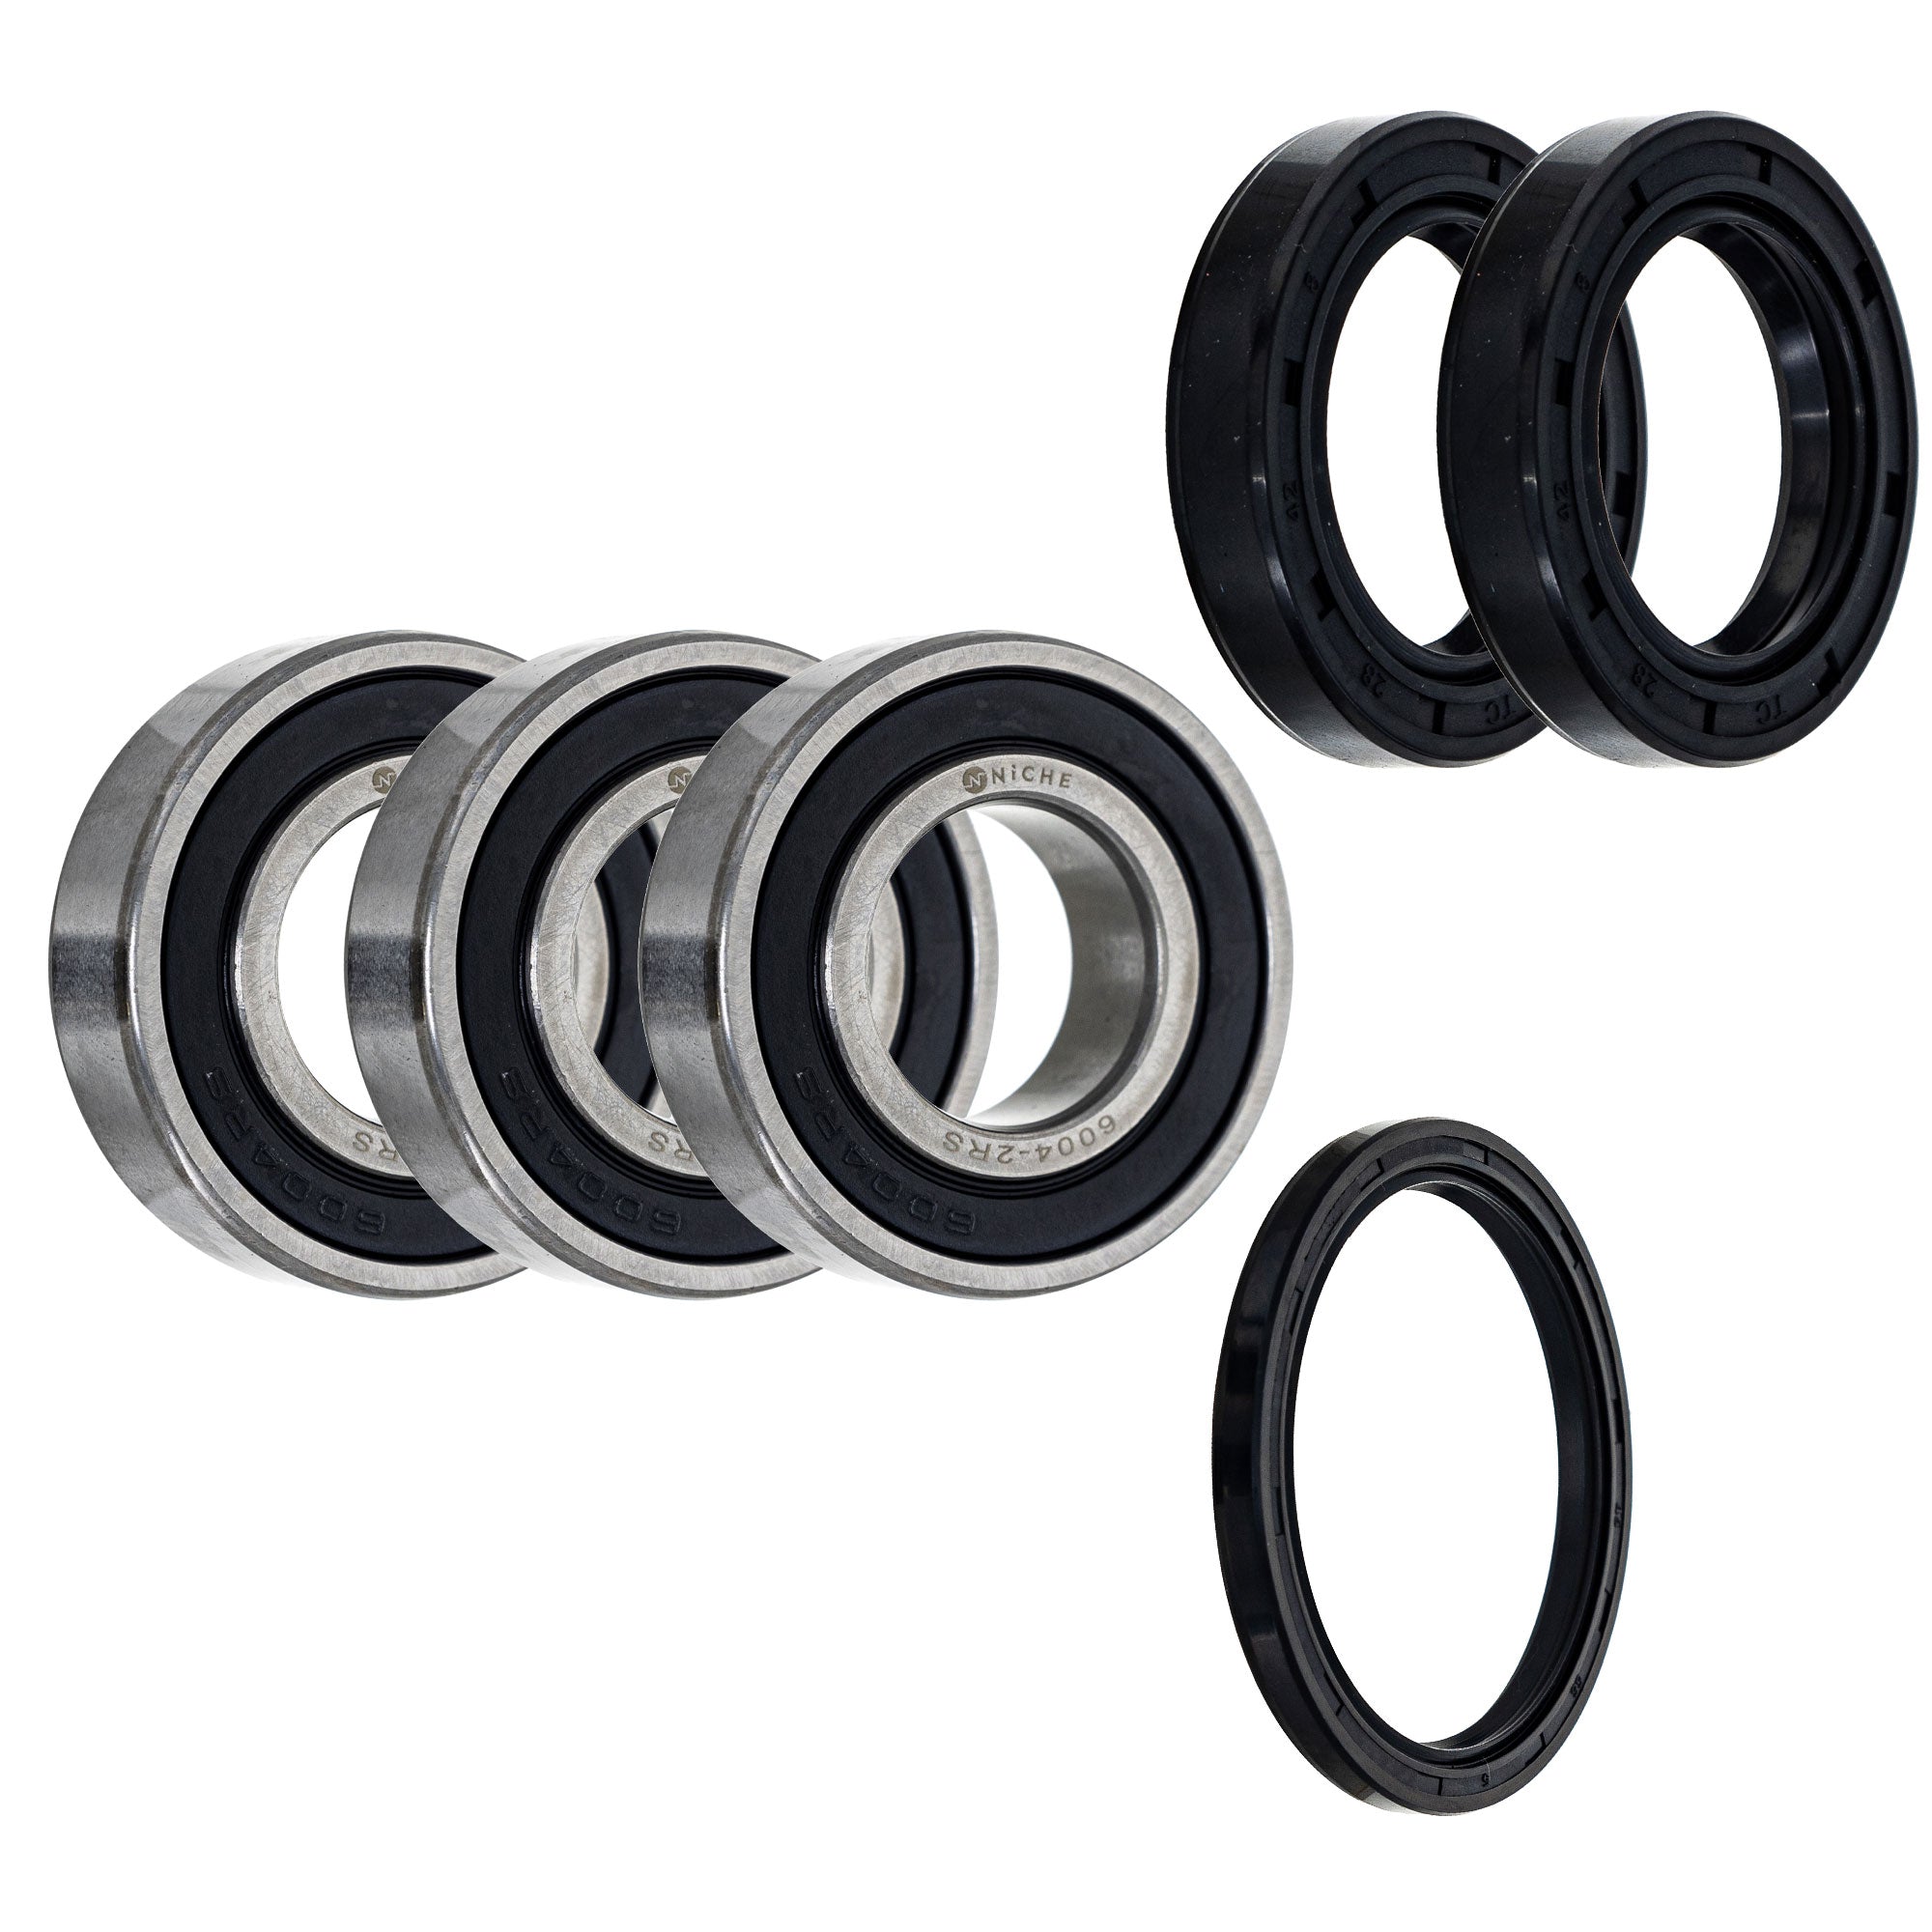 Wheel Bearing Seal Kit for zOTHER Ref No Super ST1100 Shadow Pacific NICHE MK1009038